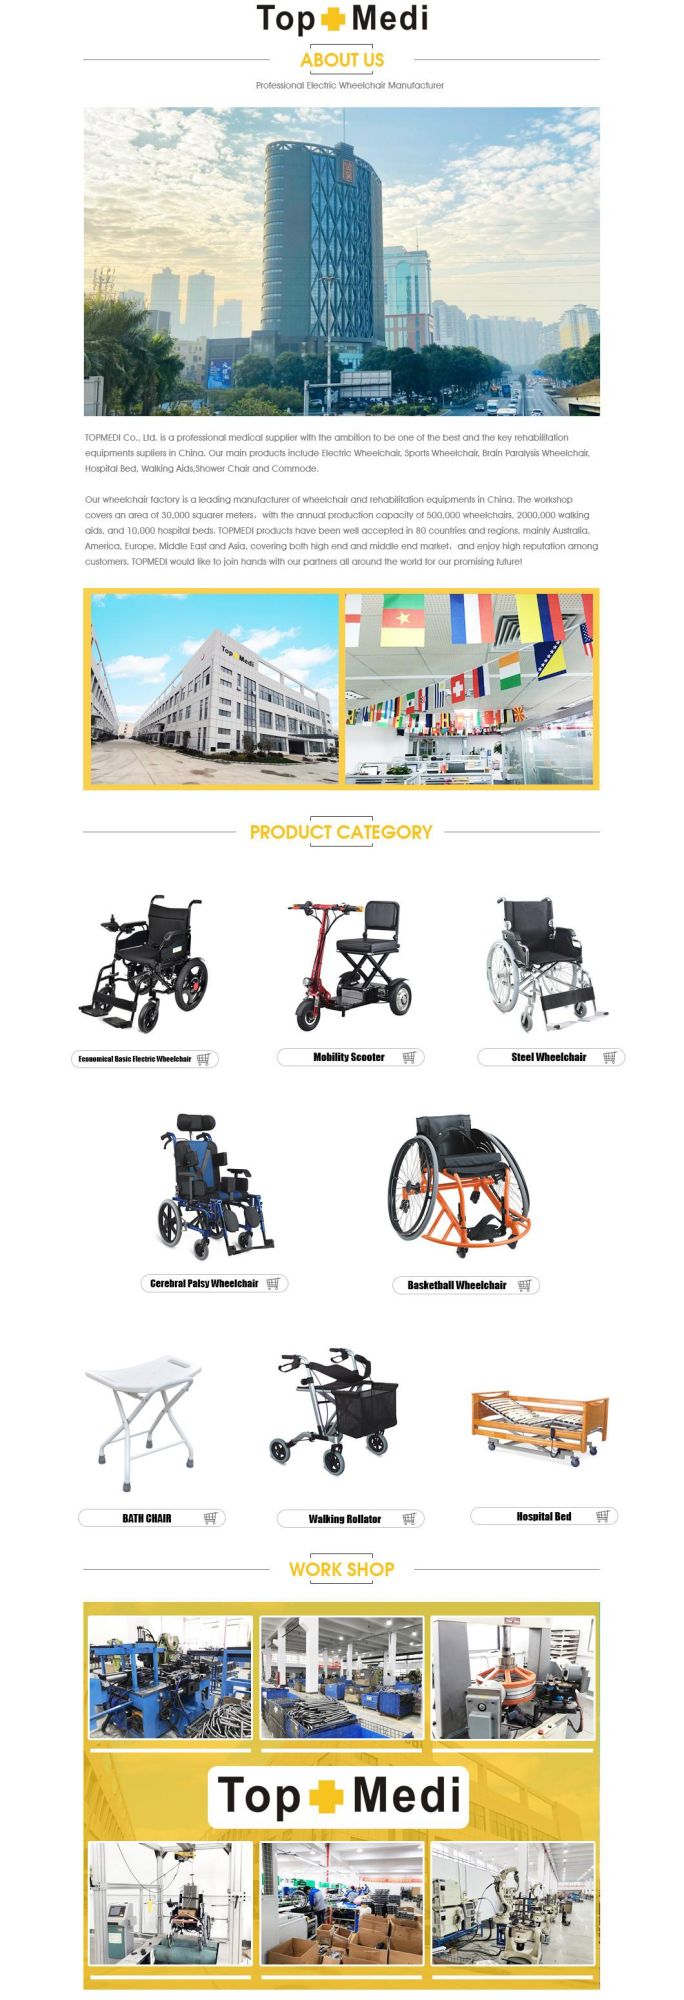 Stainless Steel CE Approved Wheel Guangzhou Topmedi Wheelchair Transport Commode Chair with Cheap Price